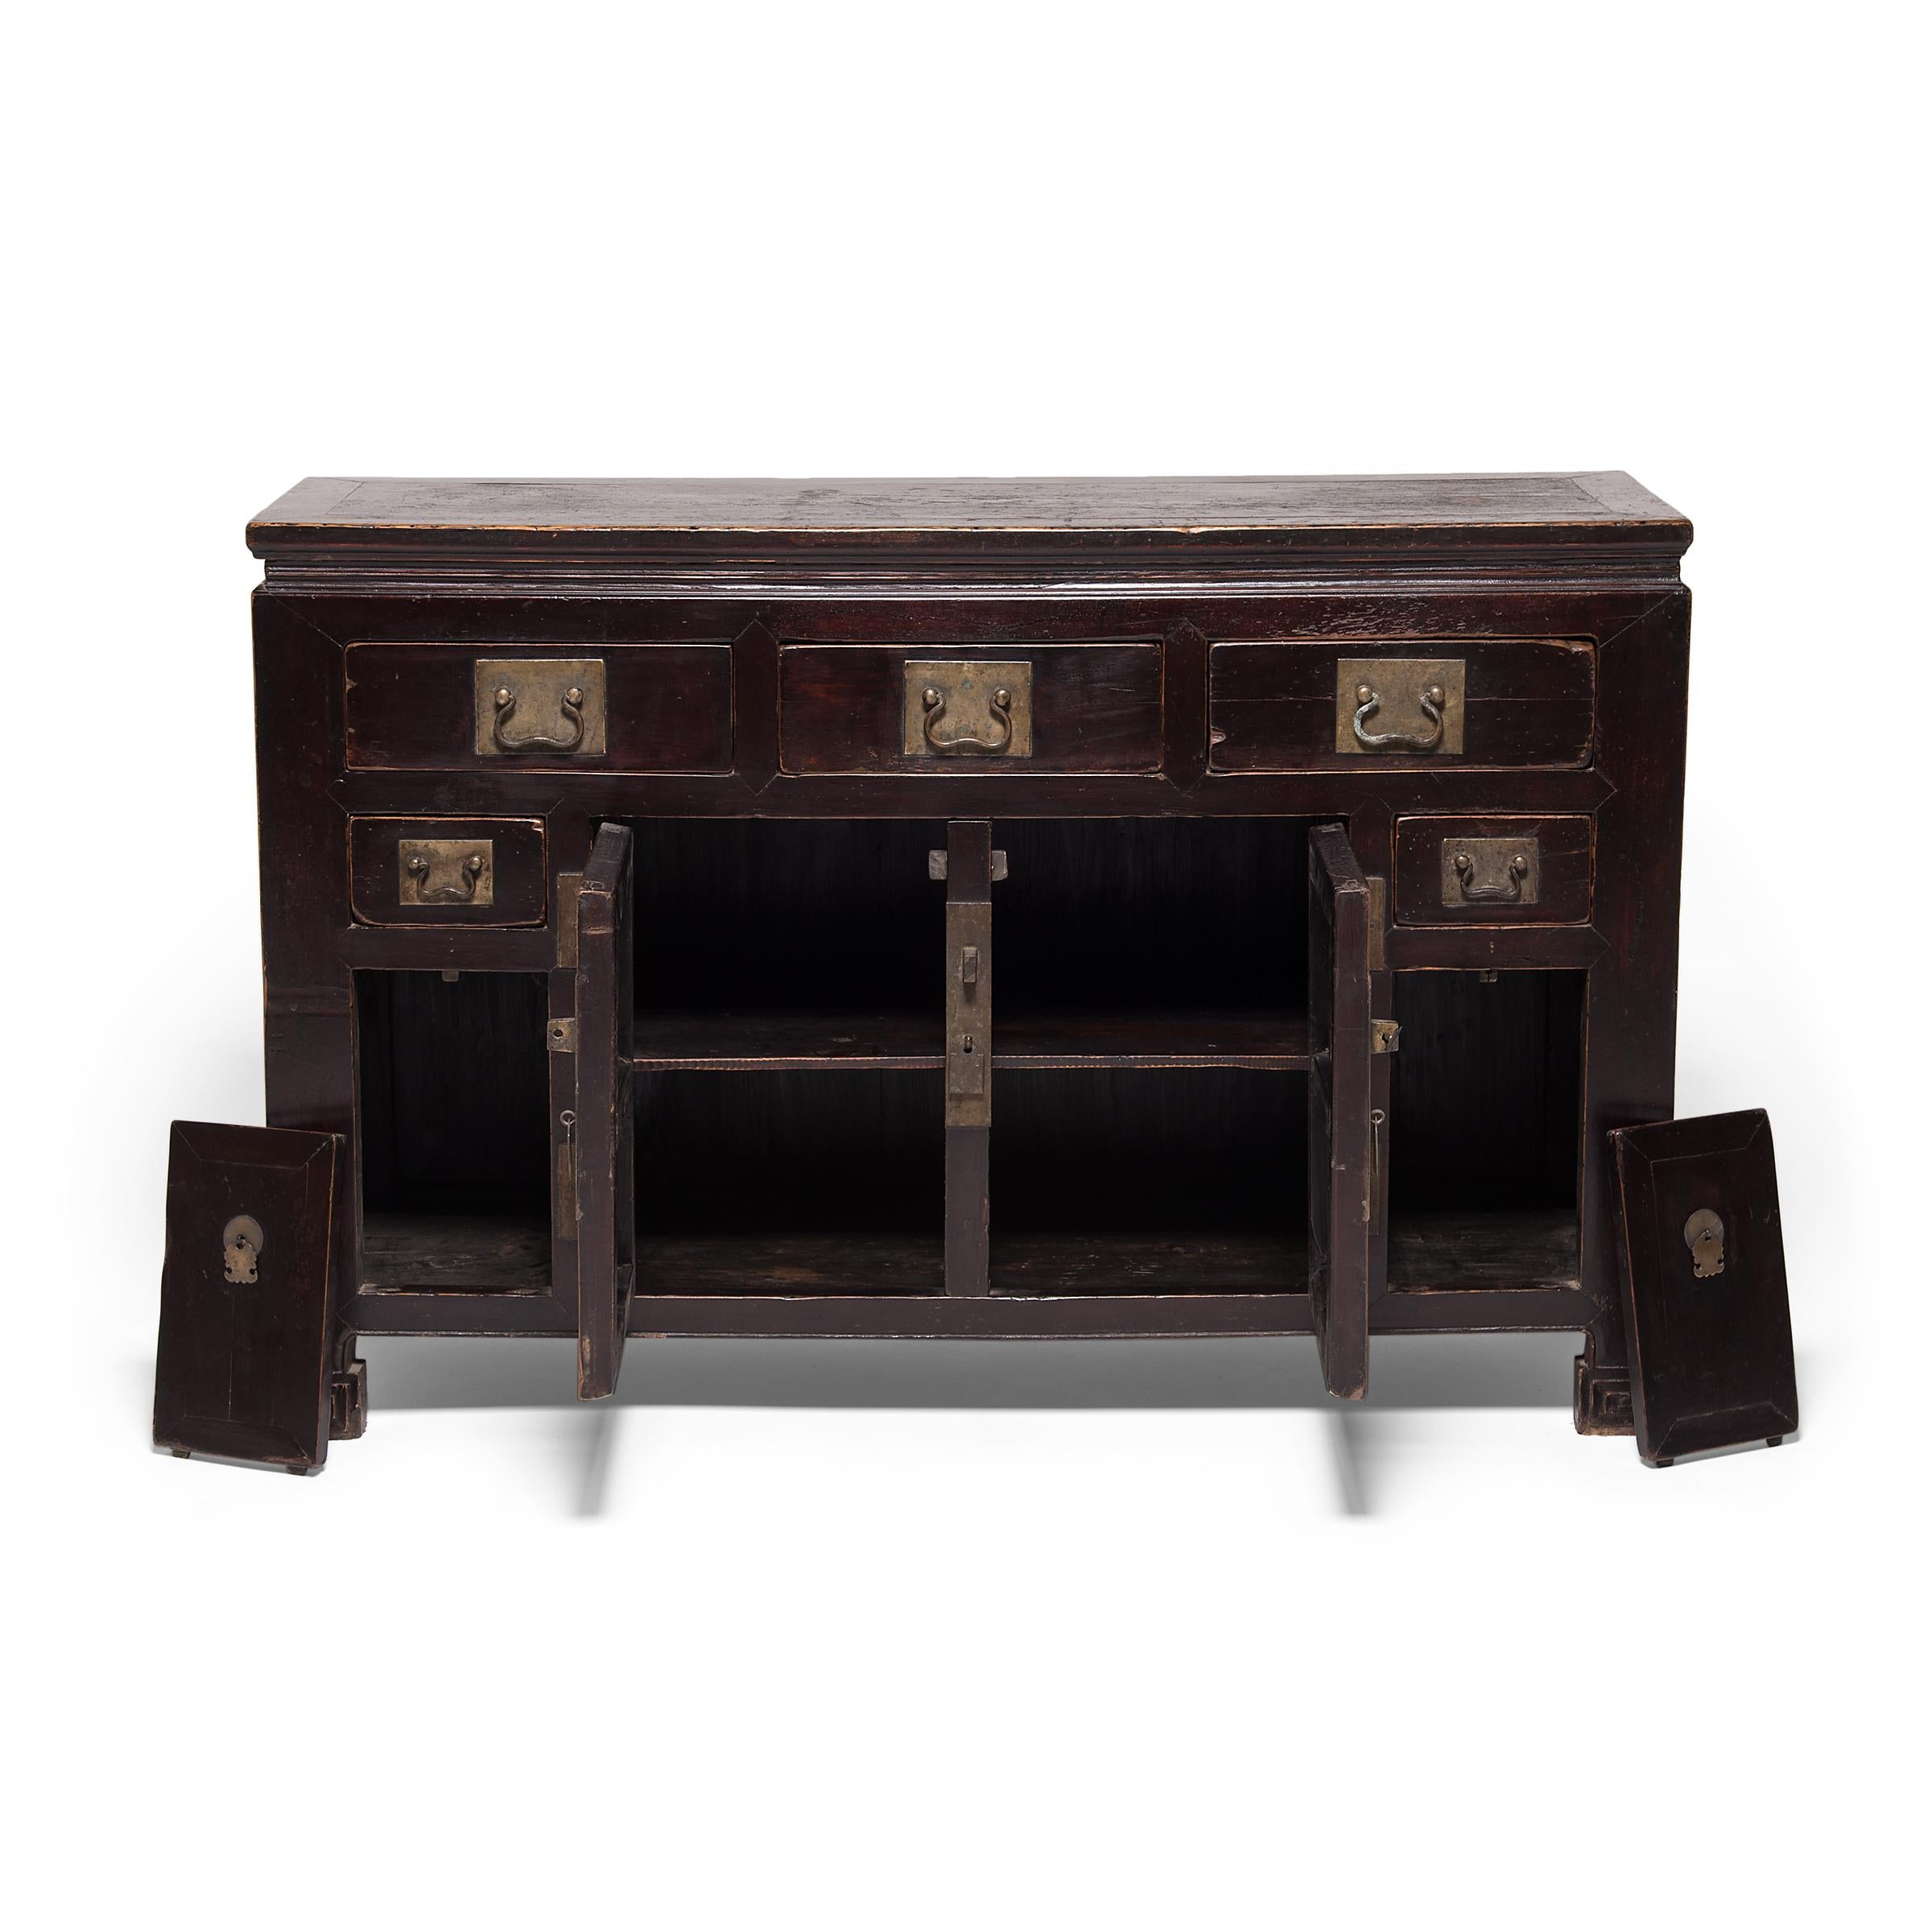 Centuries ago, this handsome coffer may have served as the family storage chest for embroidered silks or formal clothing. Crafted by a Qing-dynasty artisan in the bustling port city of Tianjin, the 19th century cabinet was likely commissioned as